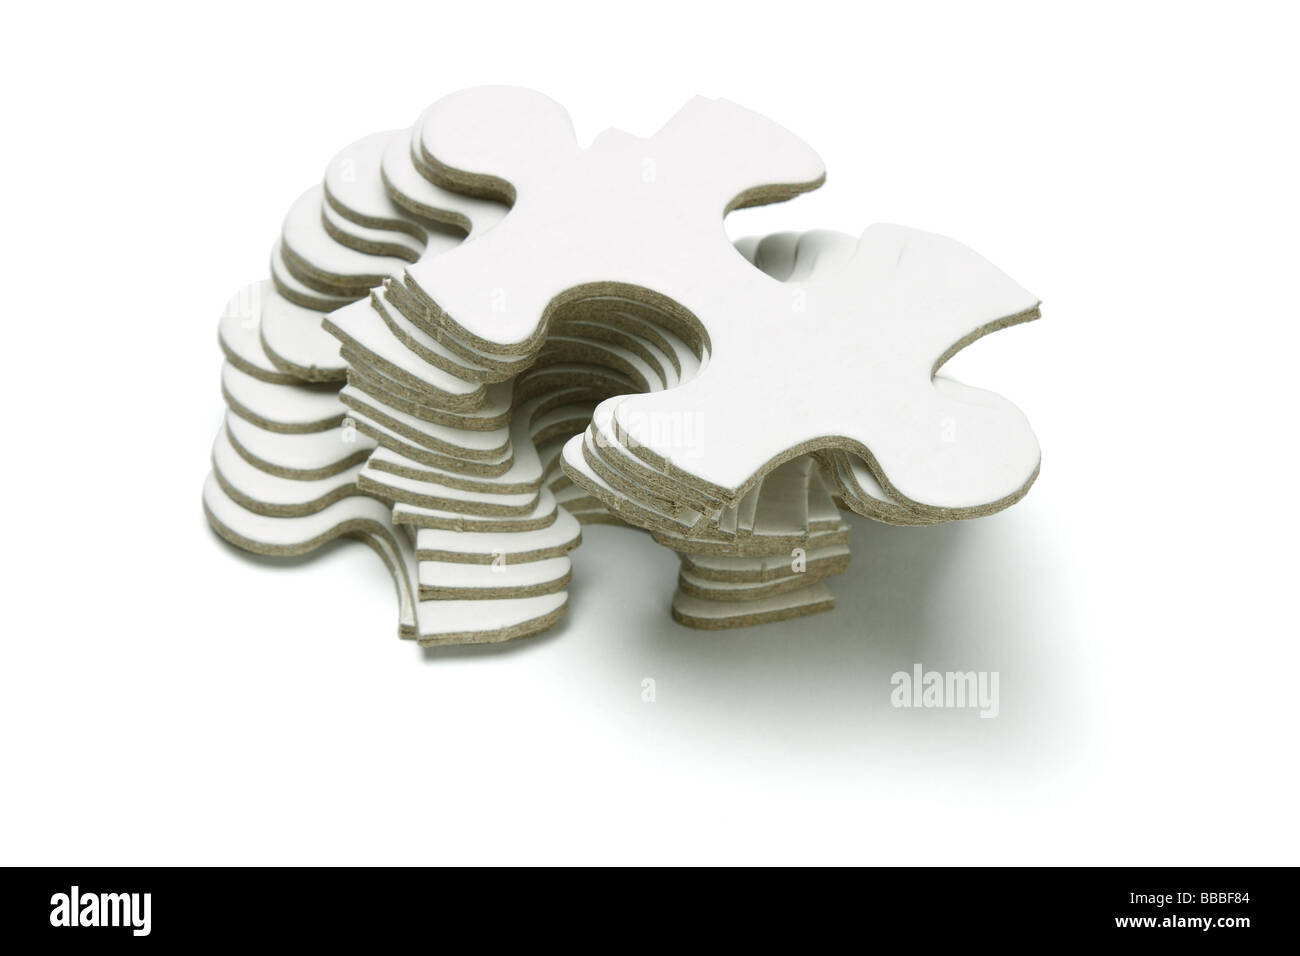 Stack of jigsaw puzzle pieces on white background Stock Photo